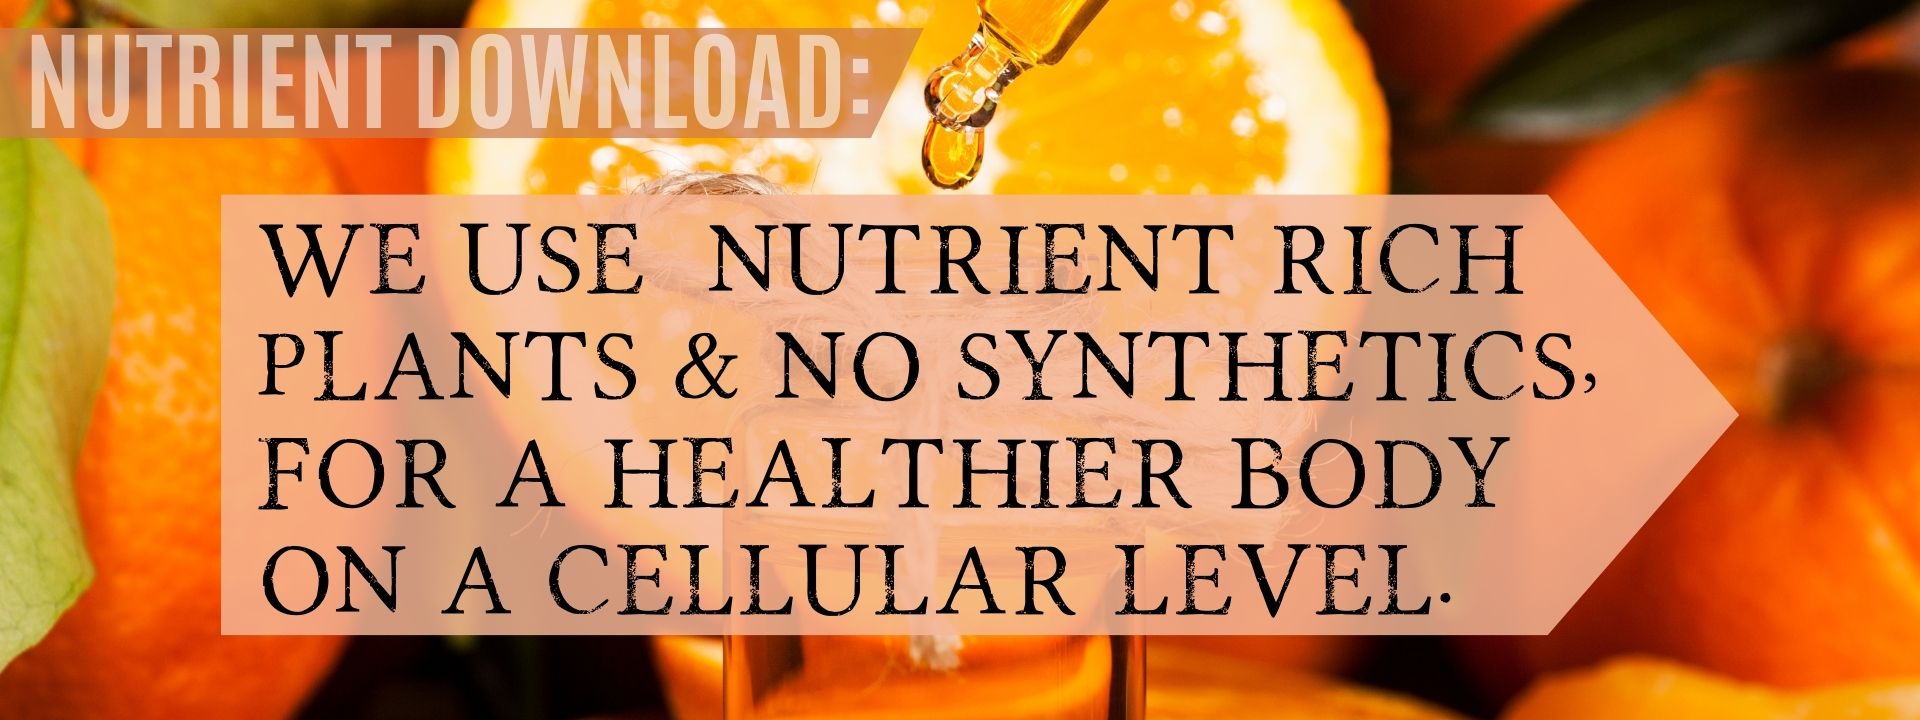 Nutrient Download: We use nutrient rich plants and no synthetics for a healthier body on a cellular level. 